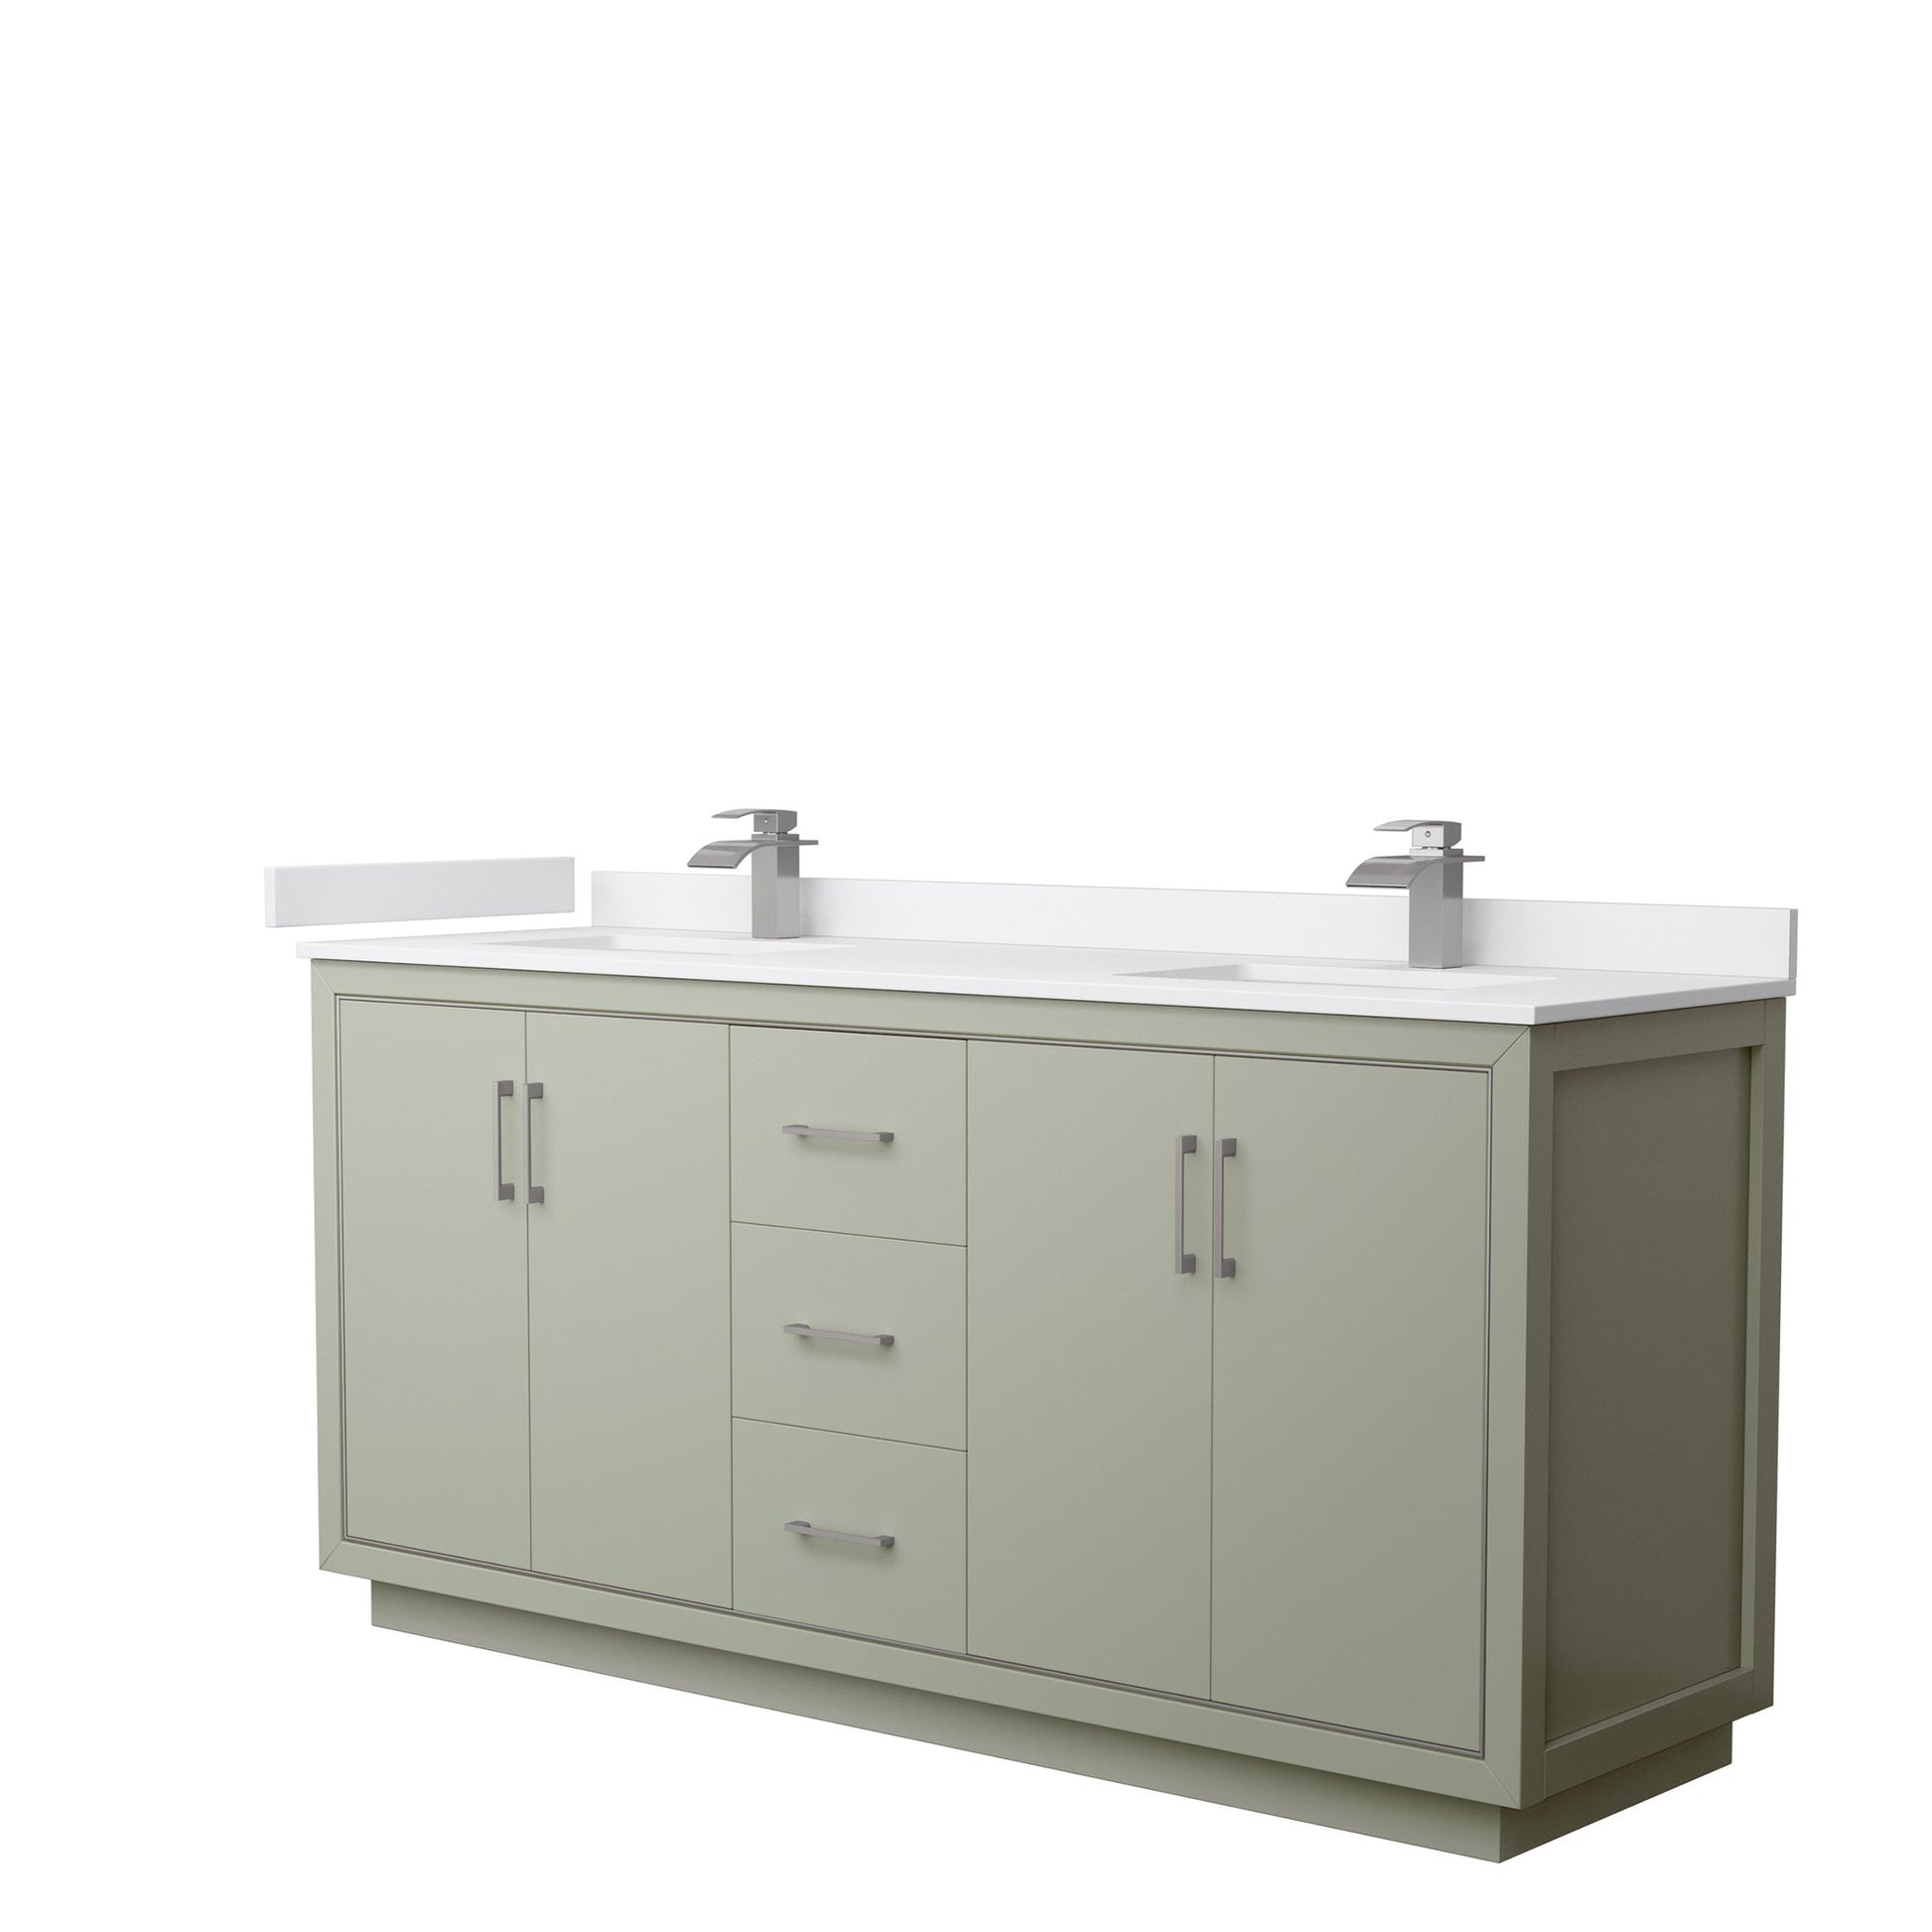 Wyndham Collection Icon 72" Double Bathroom Vanity in Light Green, White Cultured Marble Countertop, Undermount Square Sinks, Brushed Nickel Trim